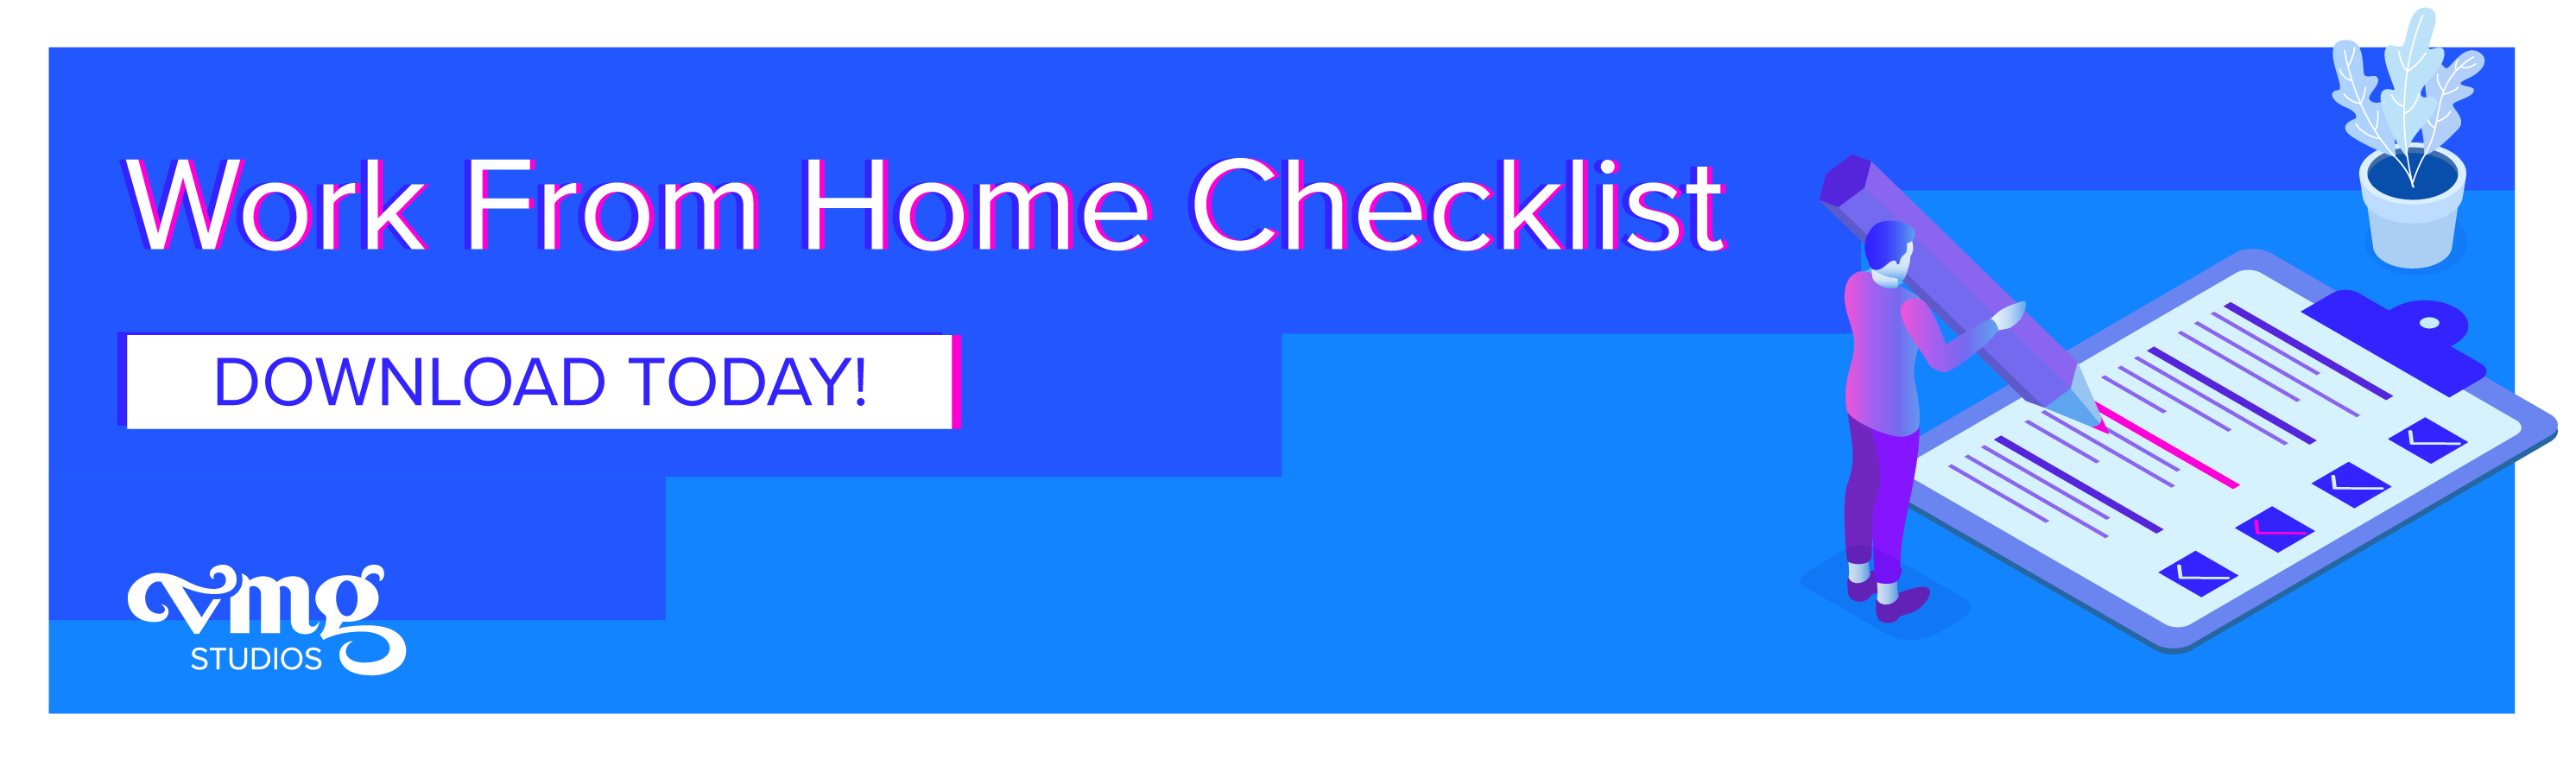 Work from home checklist - download today!